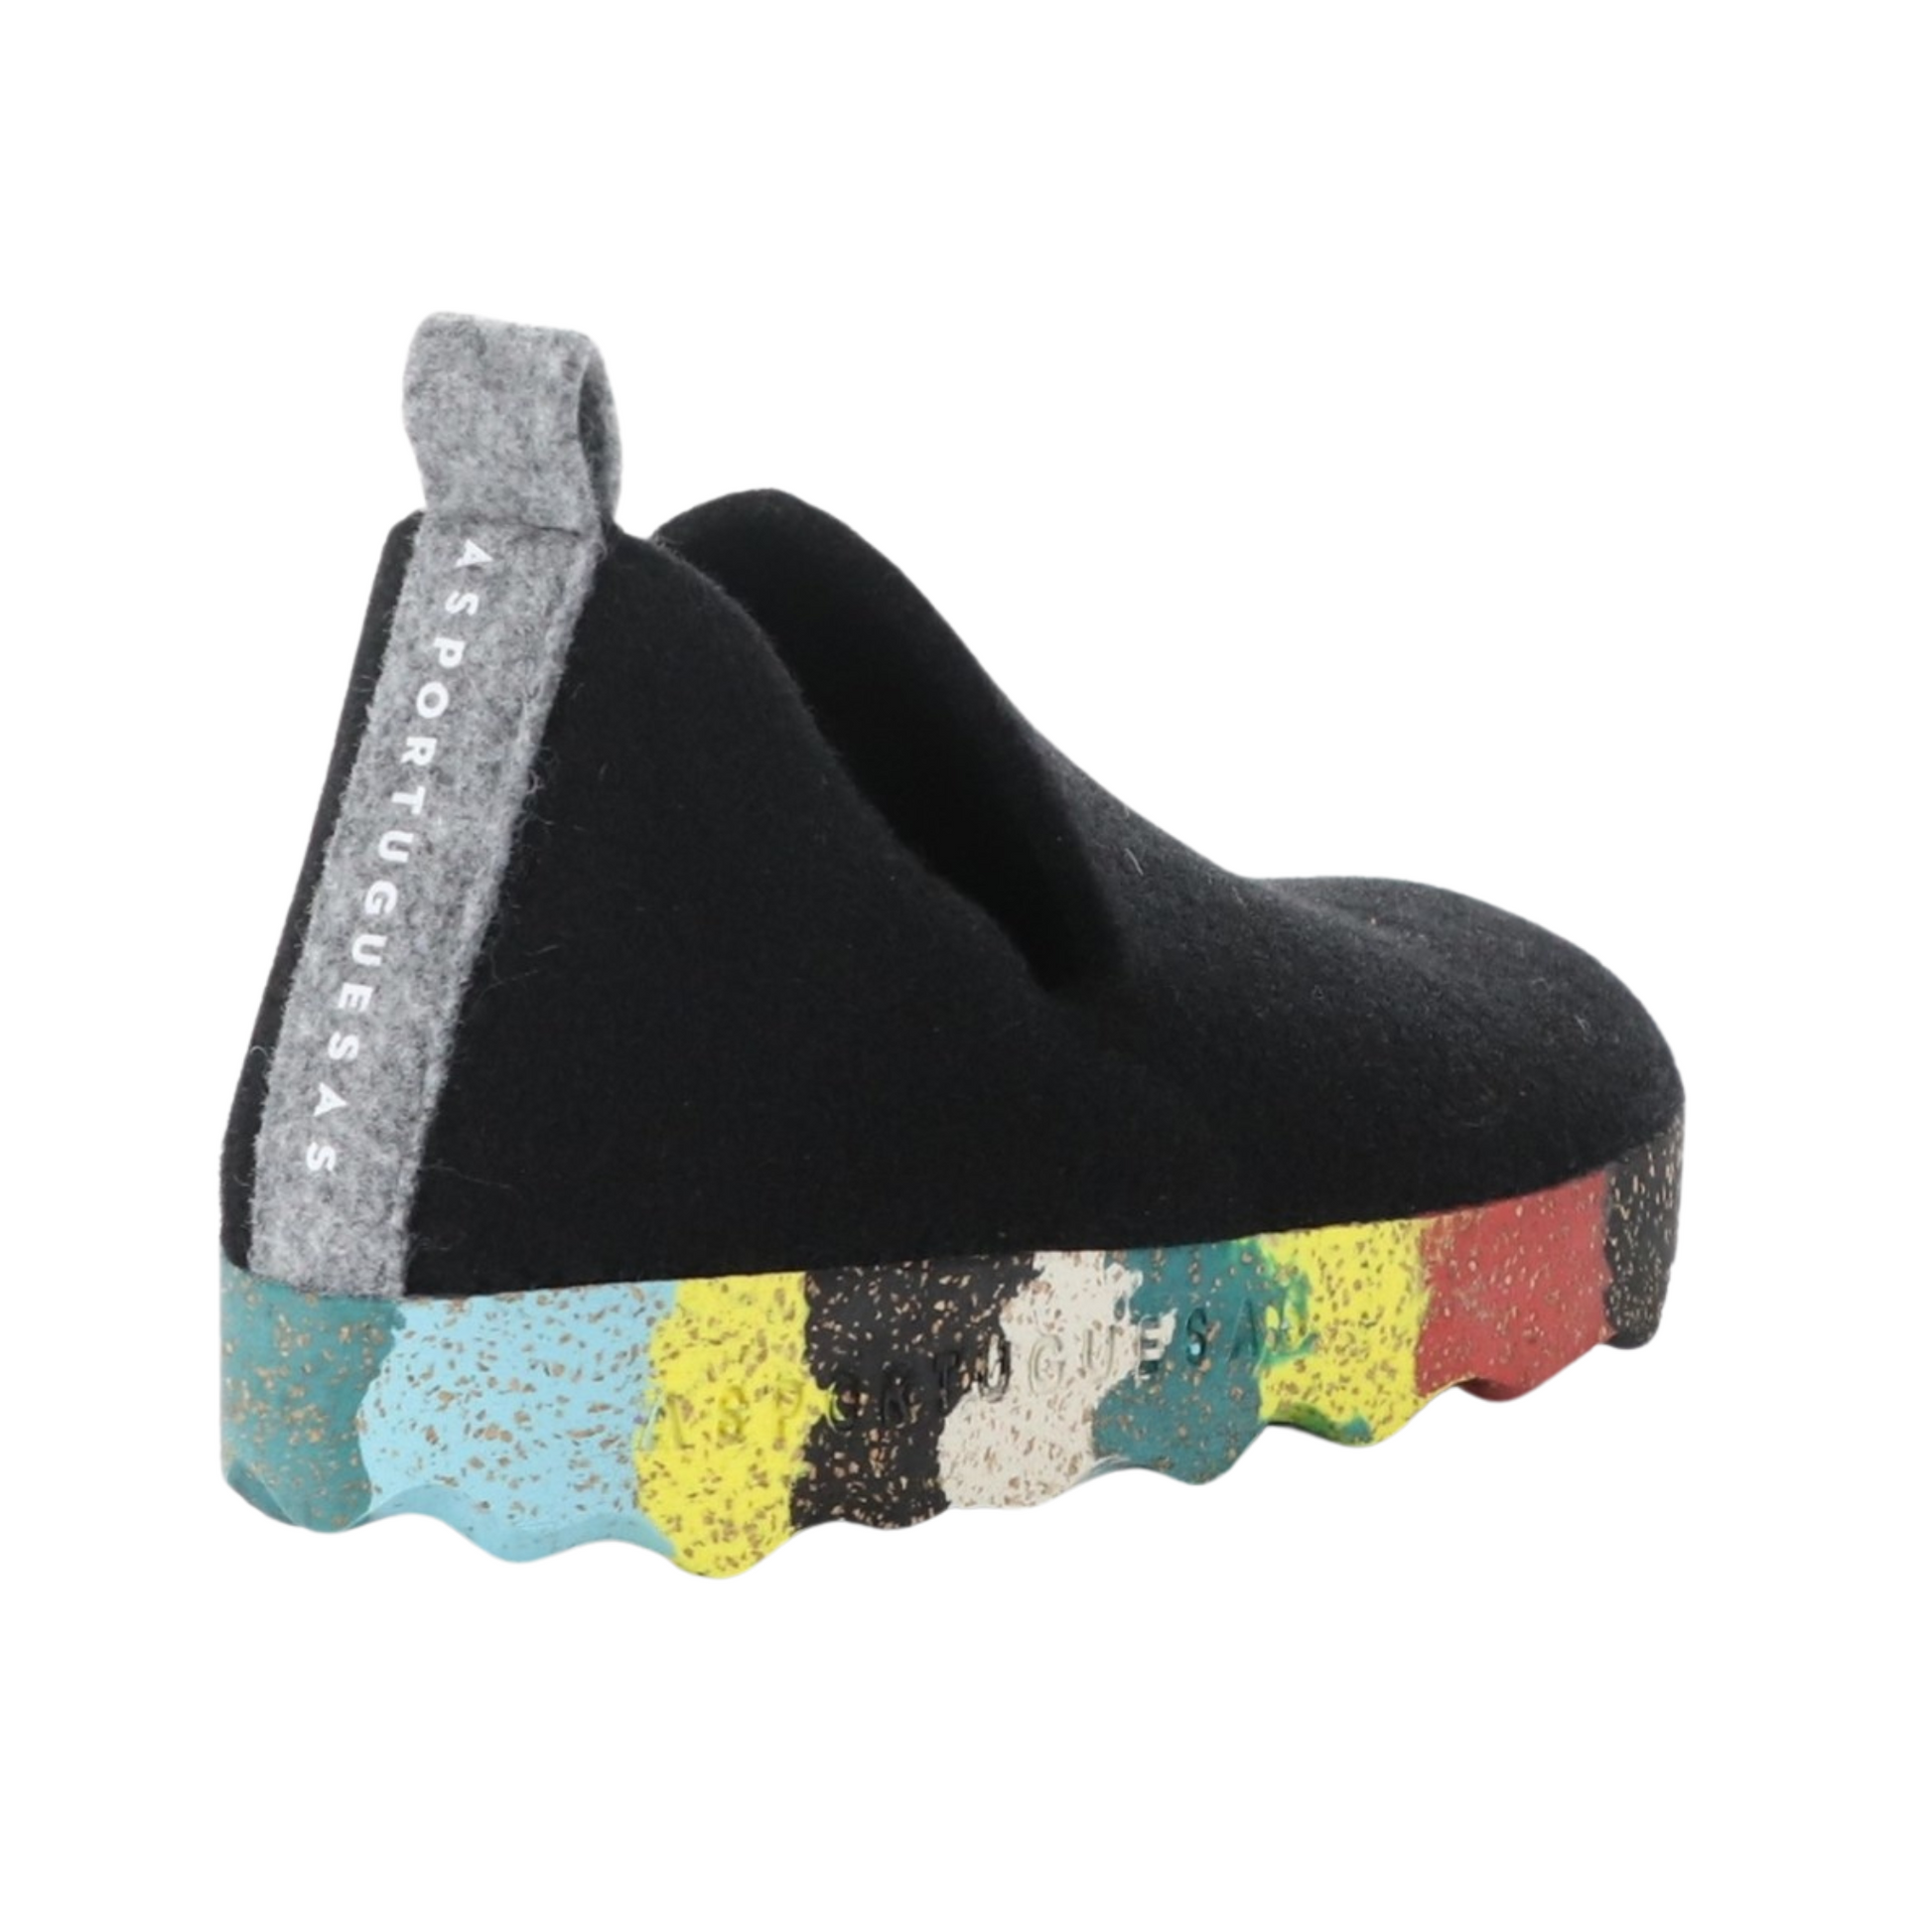 Black wool sneaker with oblong cutouts, grey heel tab, and multicoloured cork soul pictured showing heel. "asportugeuesas" is written vertically along heel tab and in relief in the sole.